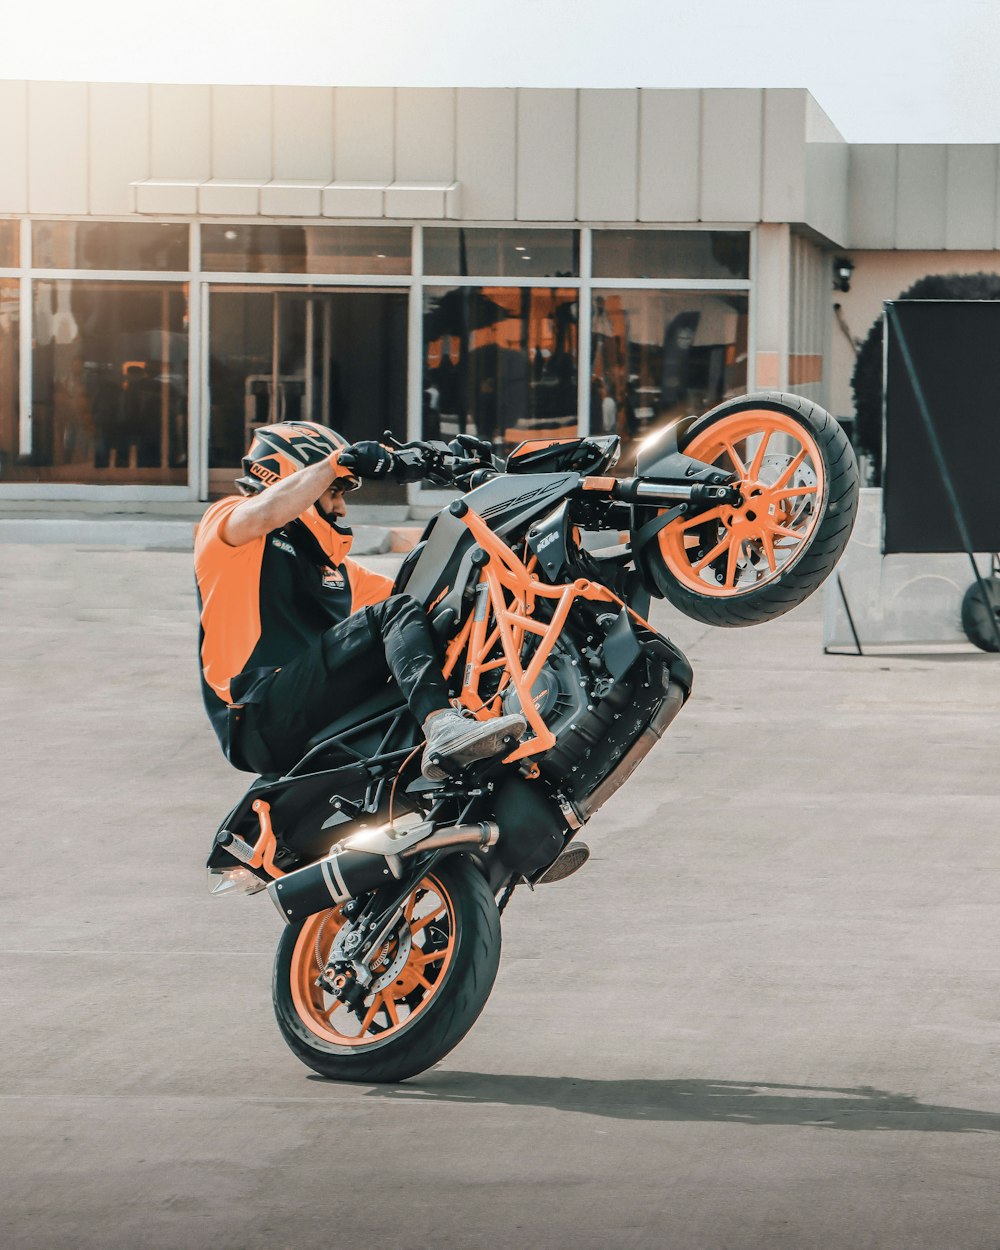 a person doing a trick on a motorcycle